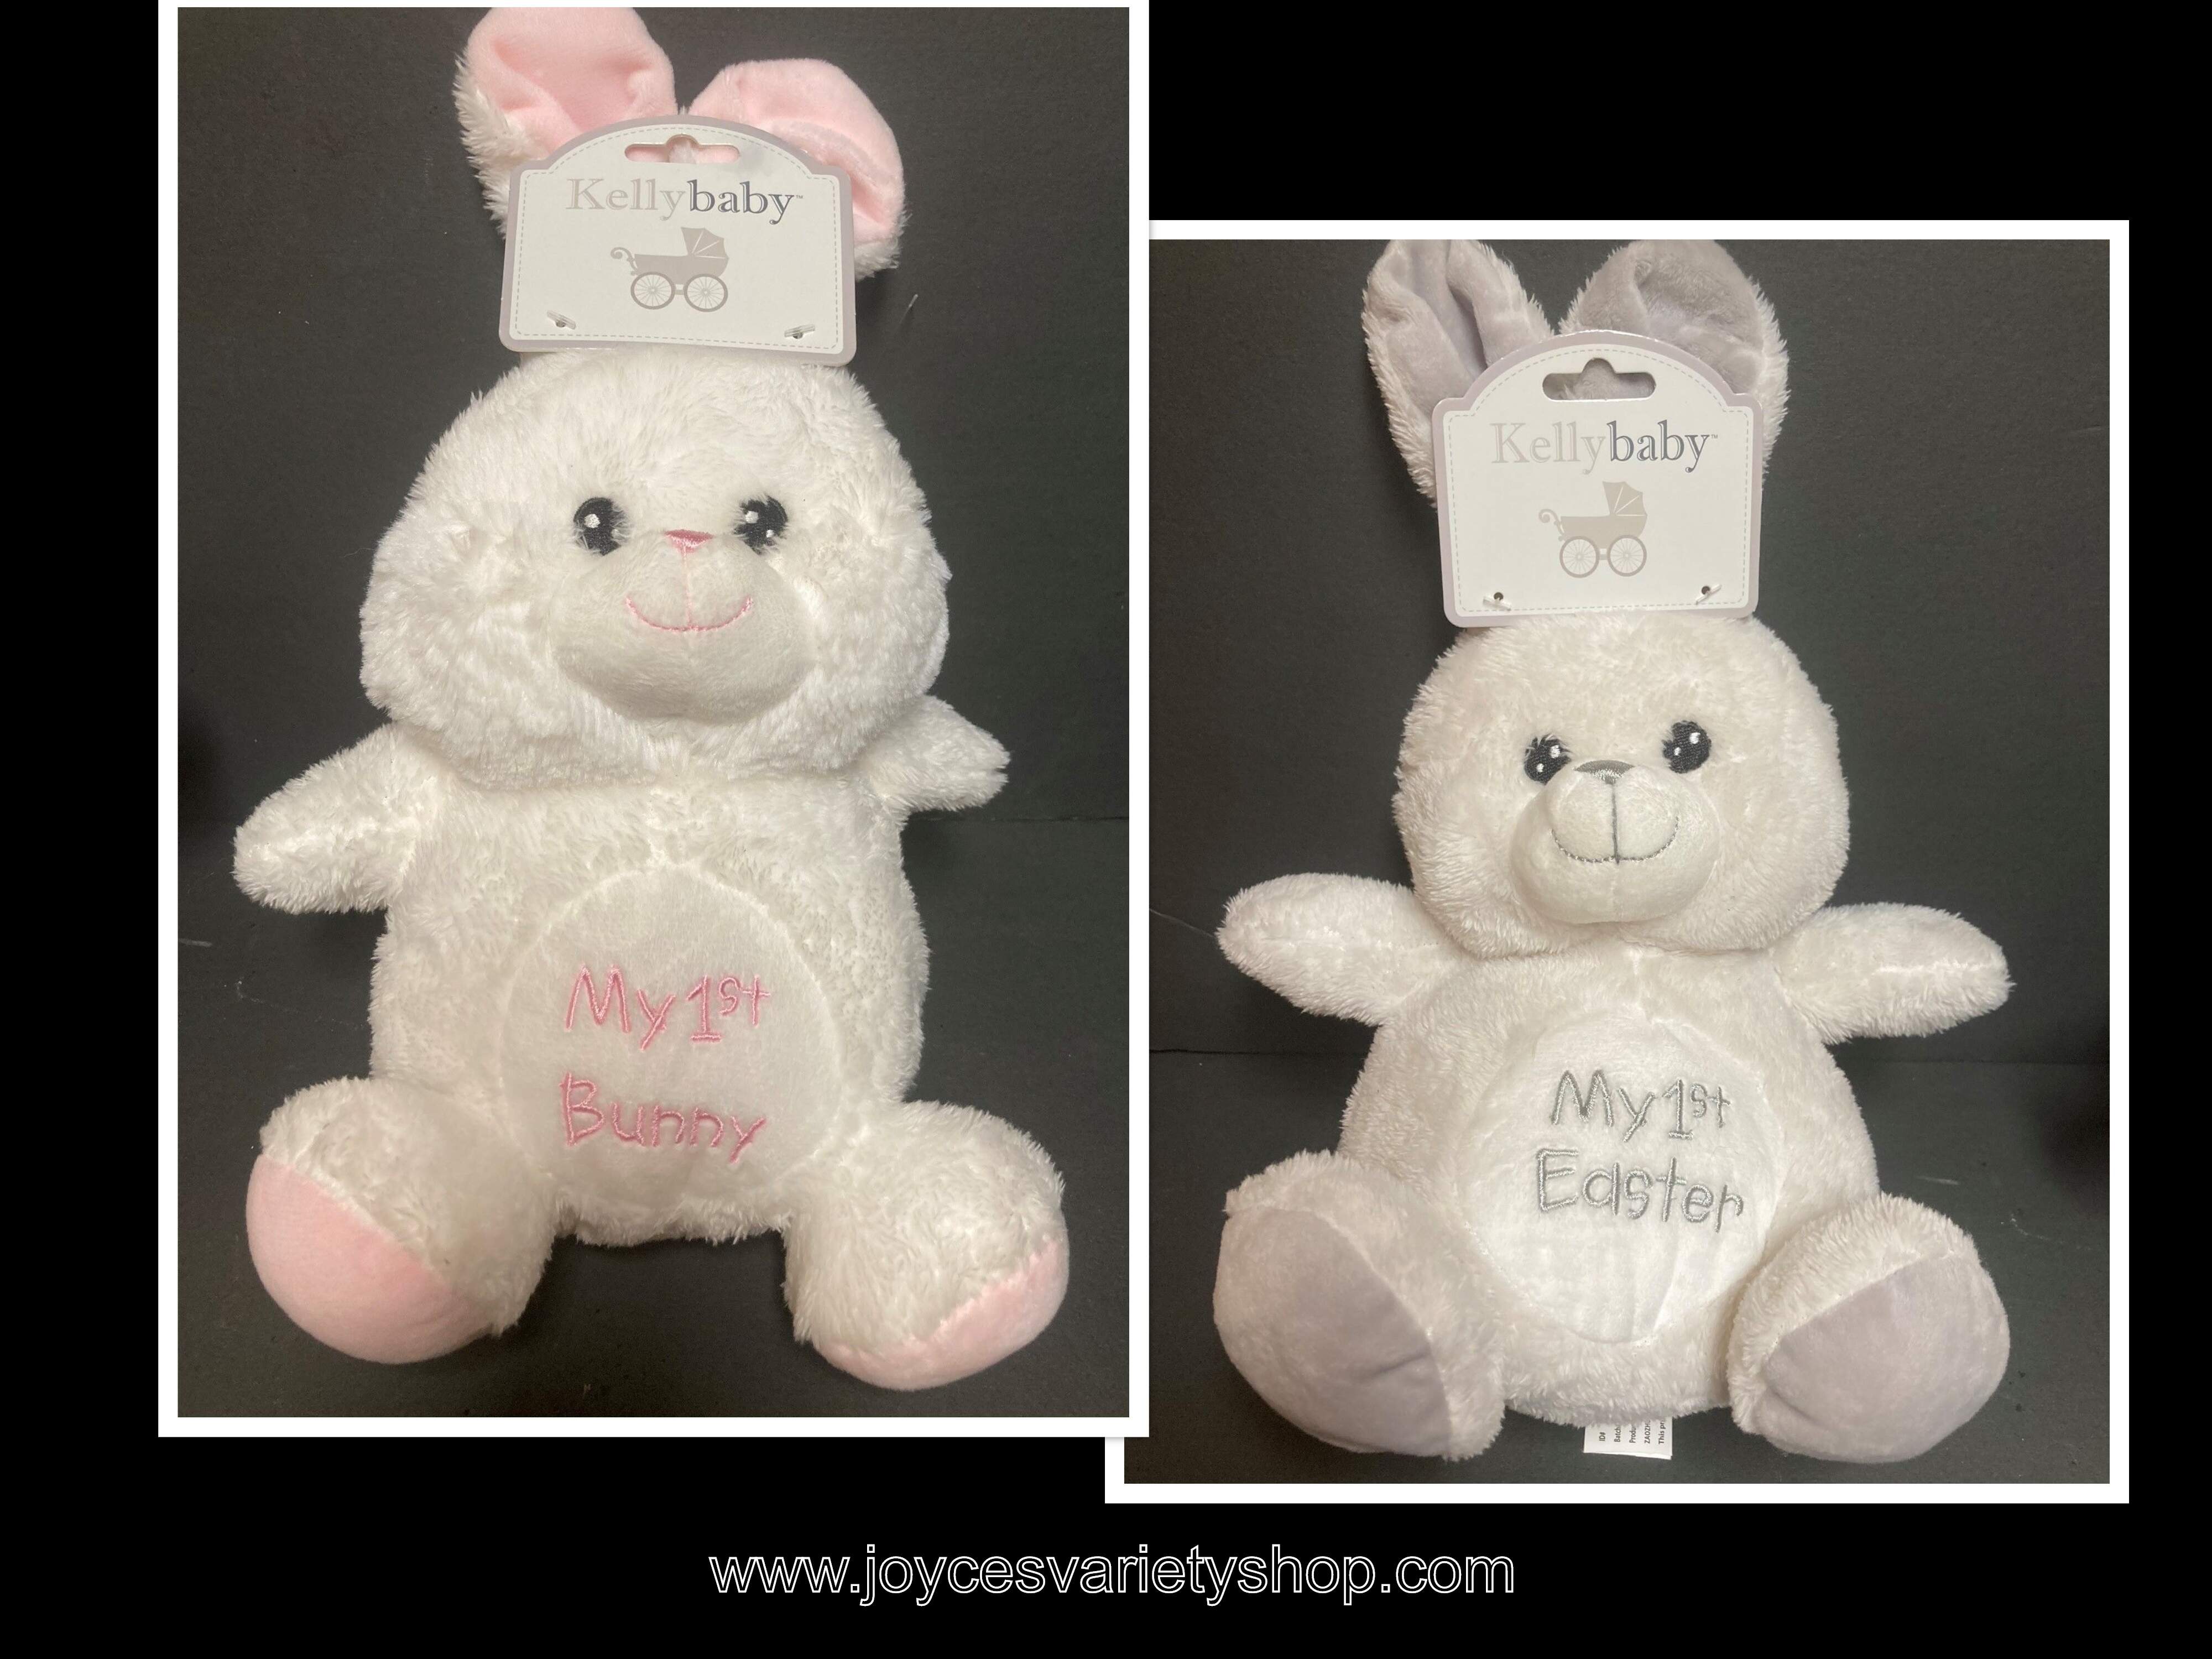 Kelly Baby Easter 12" Plush Rattle Bunny Rabbit Color Choice Gray or Pink